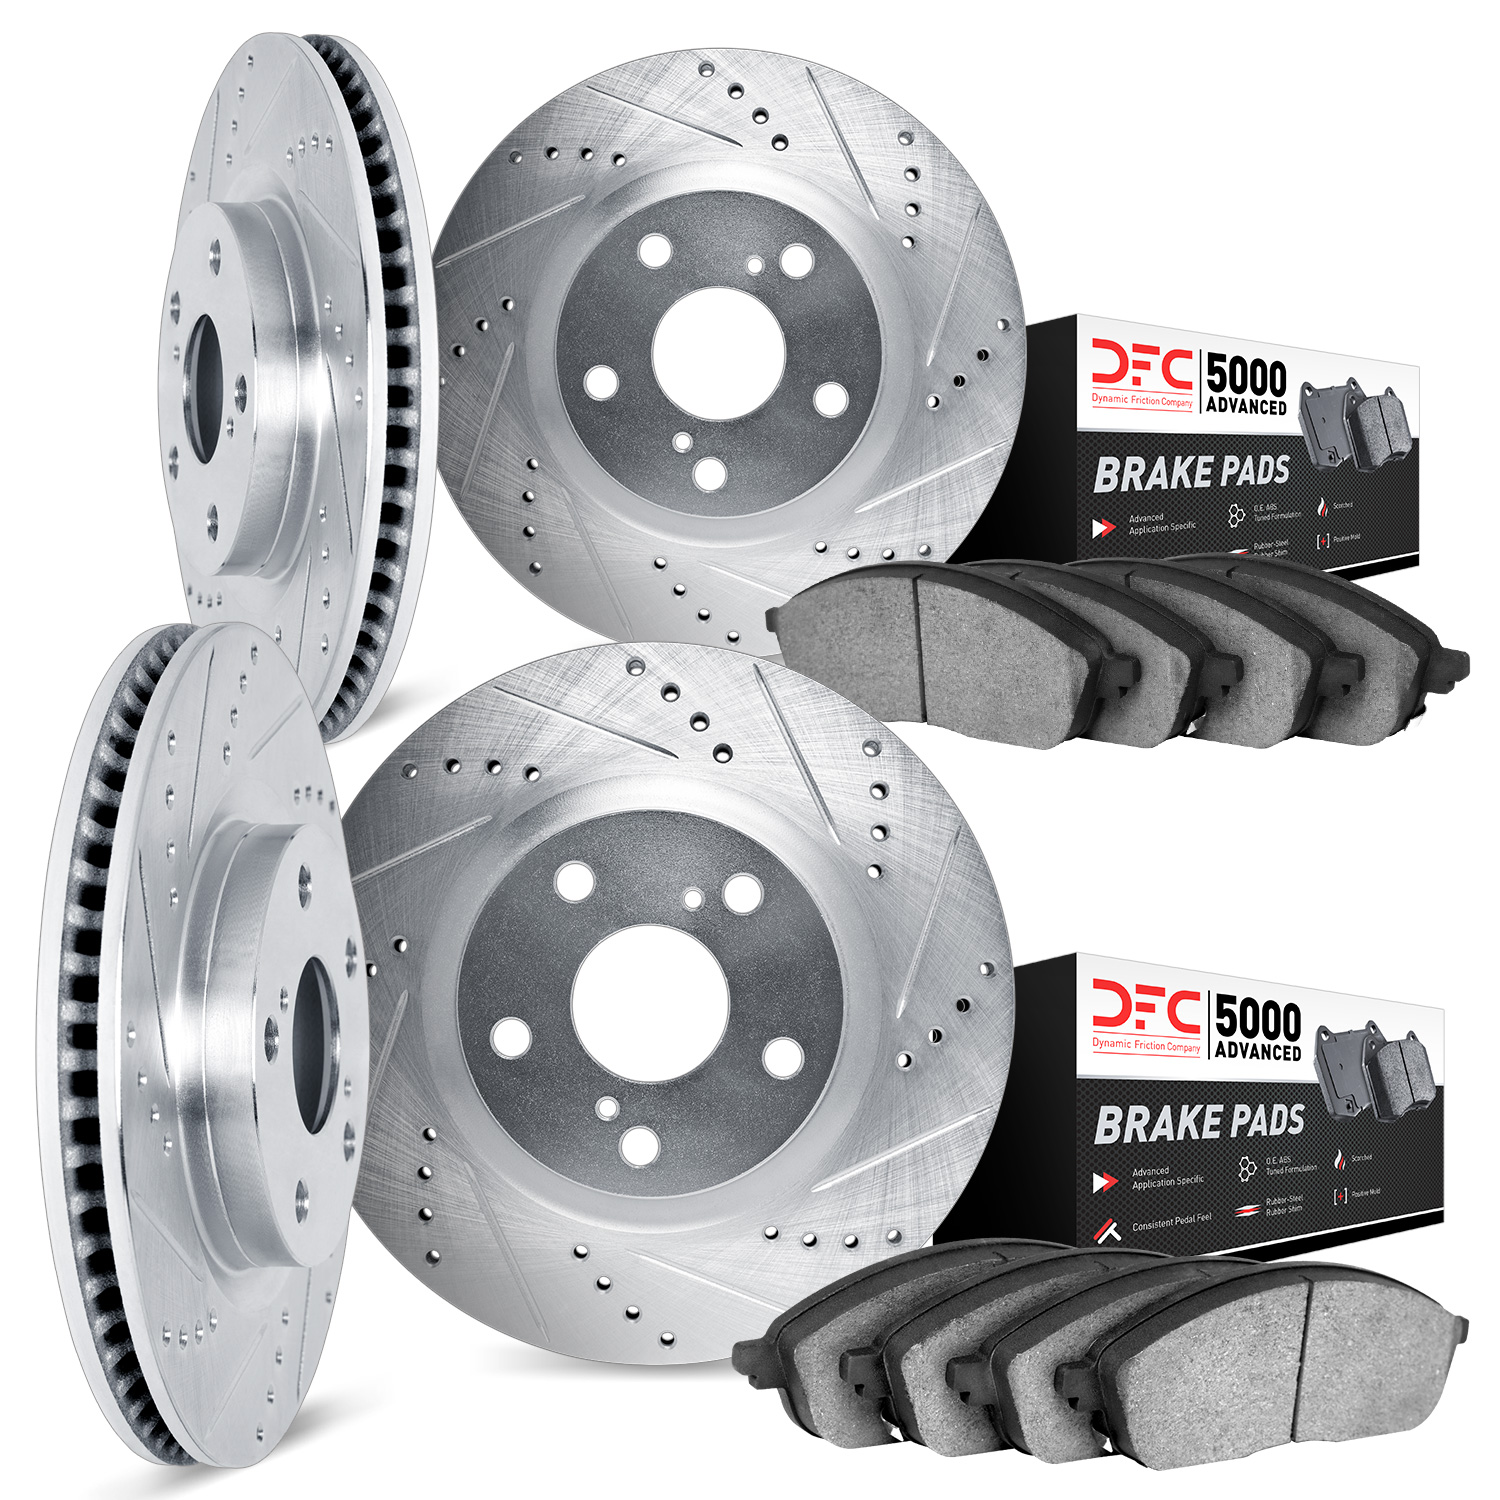 7504-31070 Drilled/Slotted Brake Rotors w/5000 Advanced Brake Pads Kit [Silver], 2014-2019 BMW, Position: Front and Rear